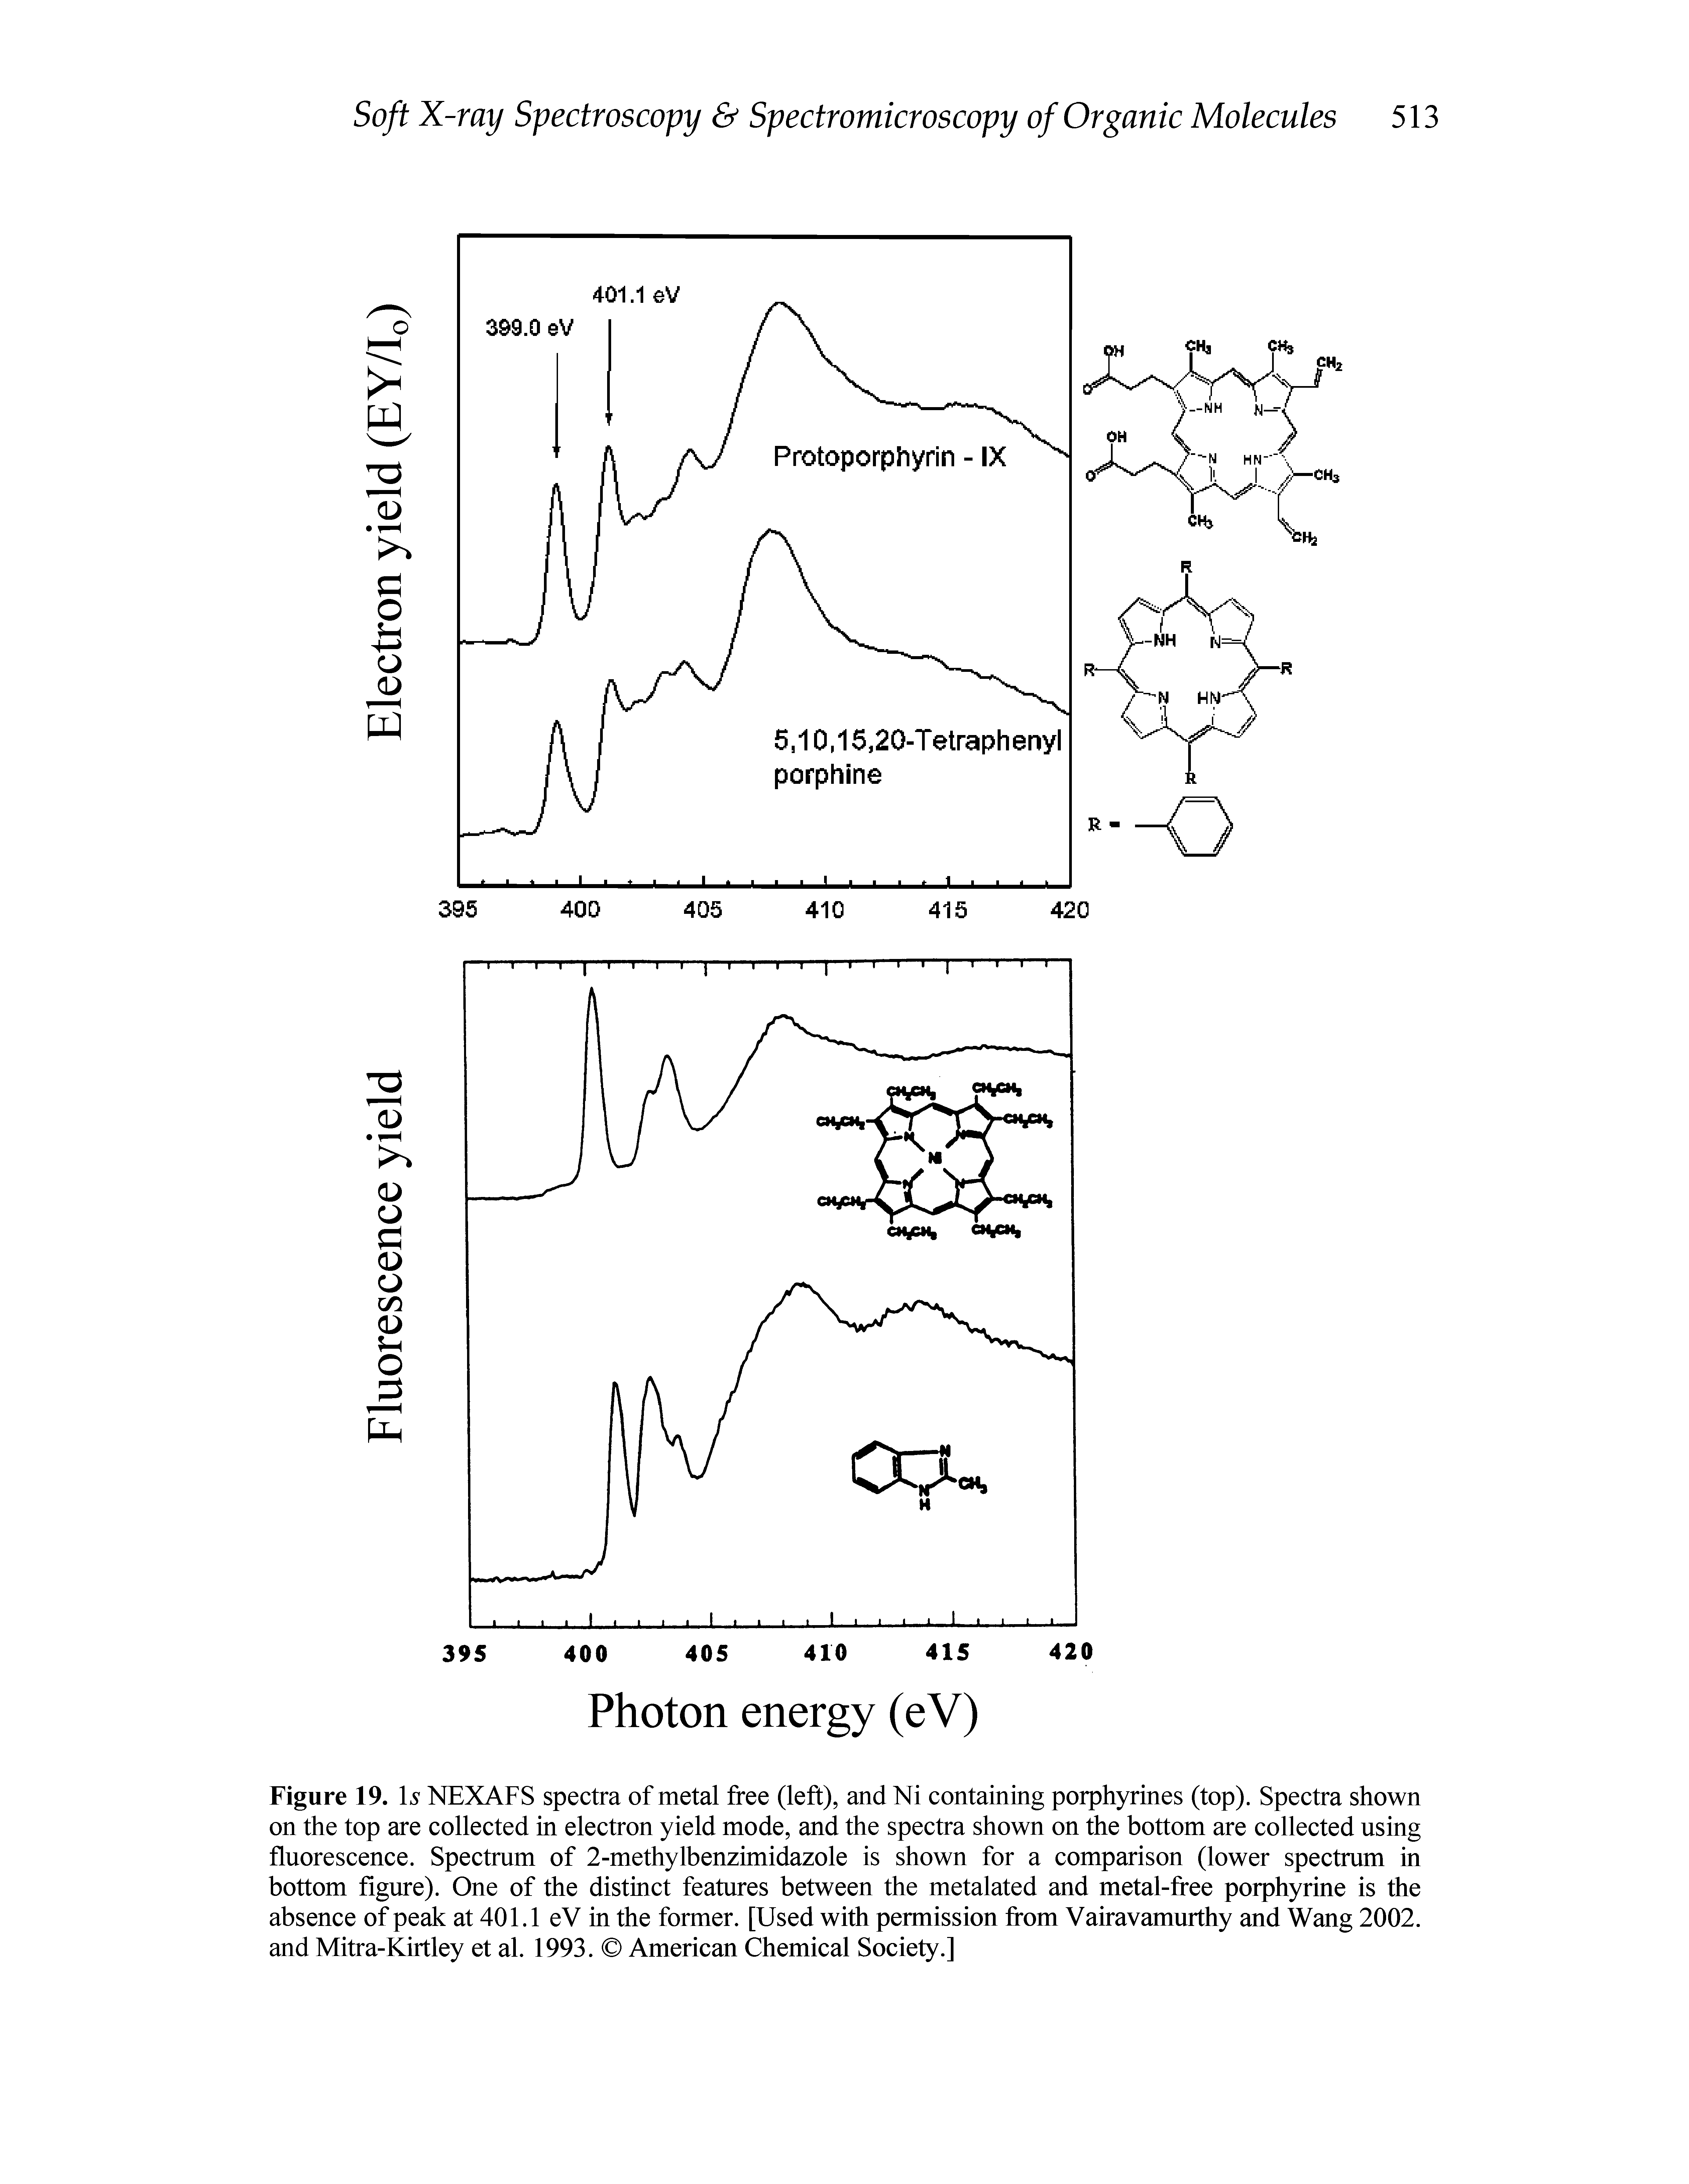 Figure 19. Is NEXAFS spectra of metal free (left), and Ni containing porphyrines (top). Spectra shown on the top are collected in electron yield mode, and the spectra shown on the bottom are collected using fluorescence. Spectrum of 2-methylbenzimidazole is shown for a comparison (lower spectrum in bottom figure). One of the distinct features between the metalated and metal-free porphyrine is the absence of peak at 401.1 eV in the former. [Used with permission from Vairavamurthy and Wang 2002. and Mitra-Kirtley et al. 1993. American Chemical Society.]...